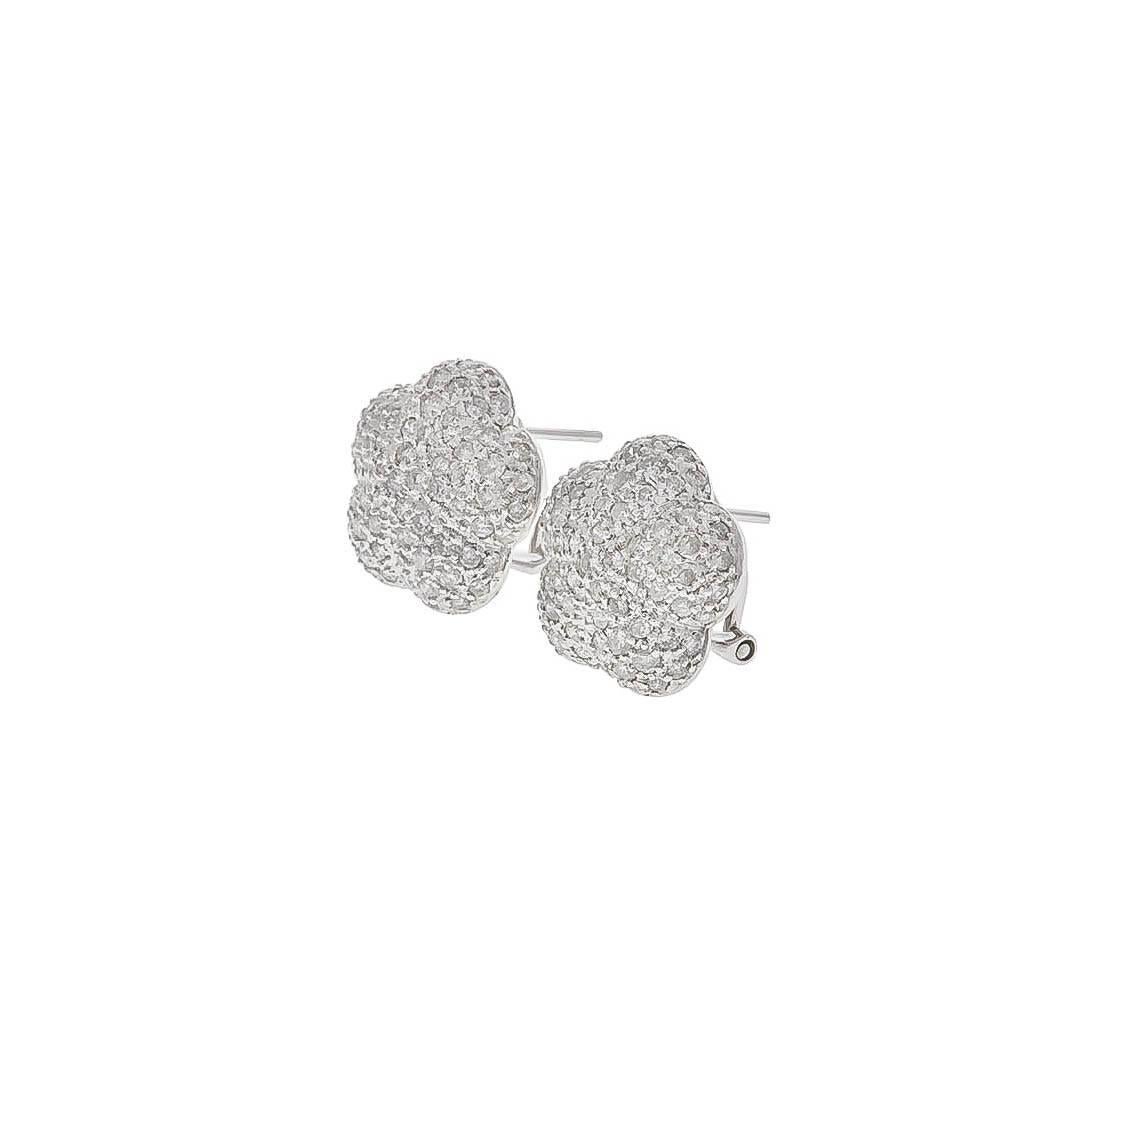 14K white gold earrings containing 2.10 carats of pave set diamonds.
The earrings have post and clip.